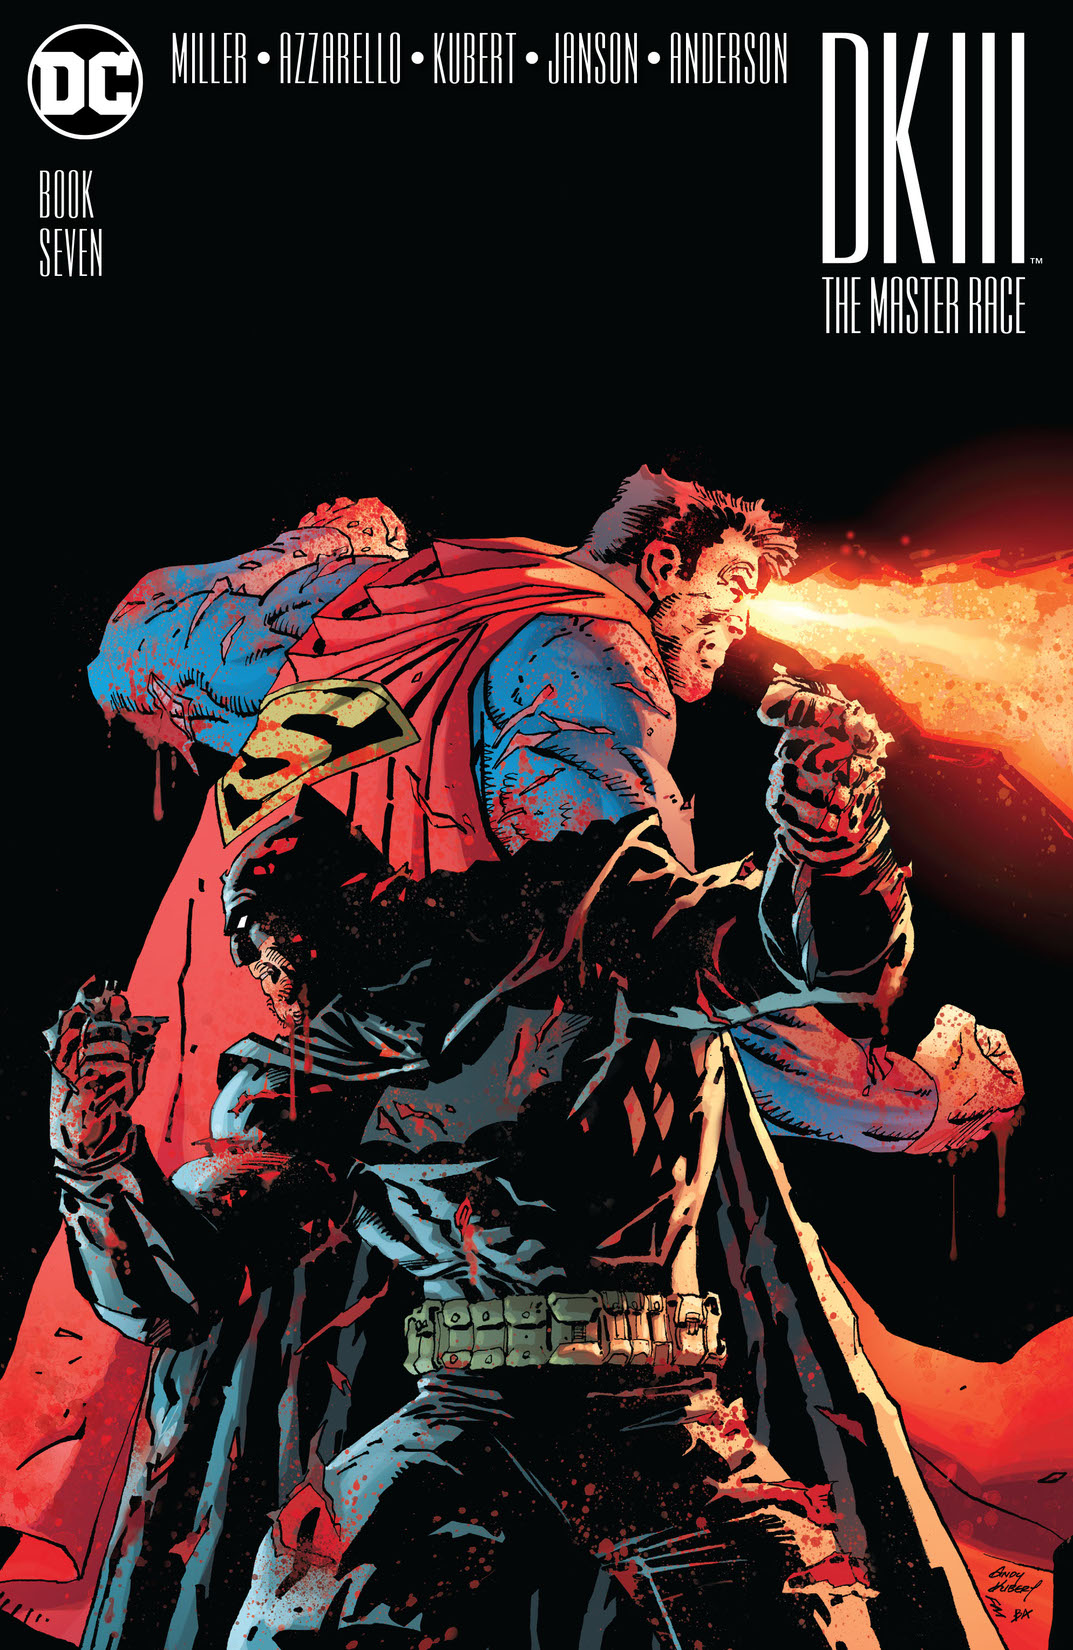 Dark Knight III: The Master Race #7 preview images